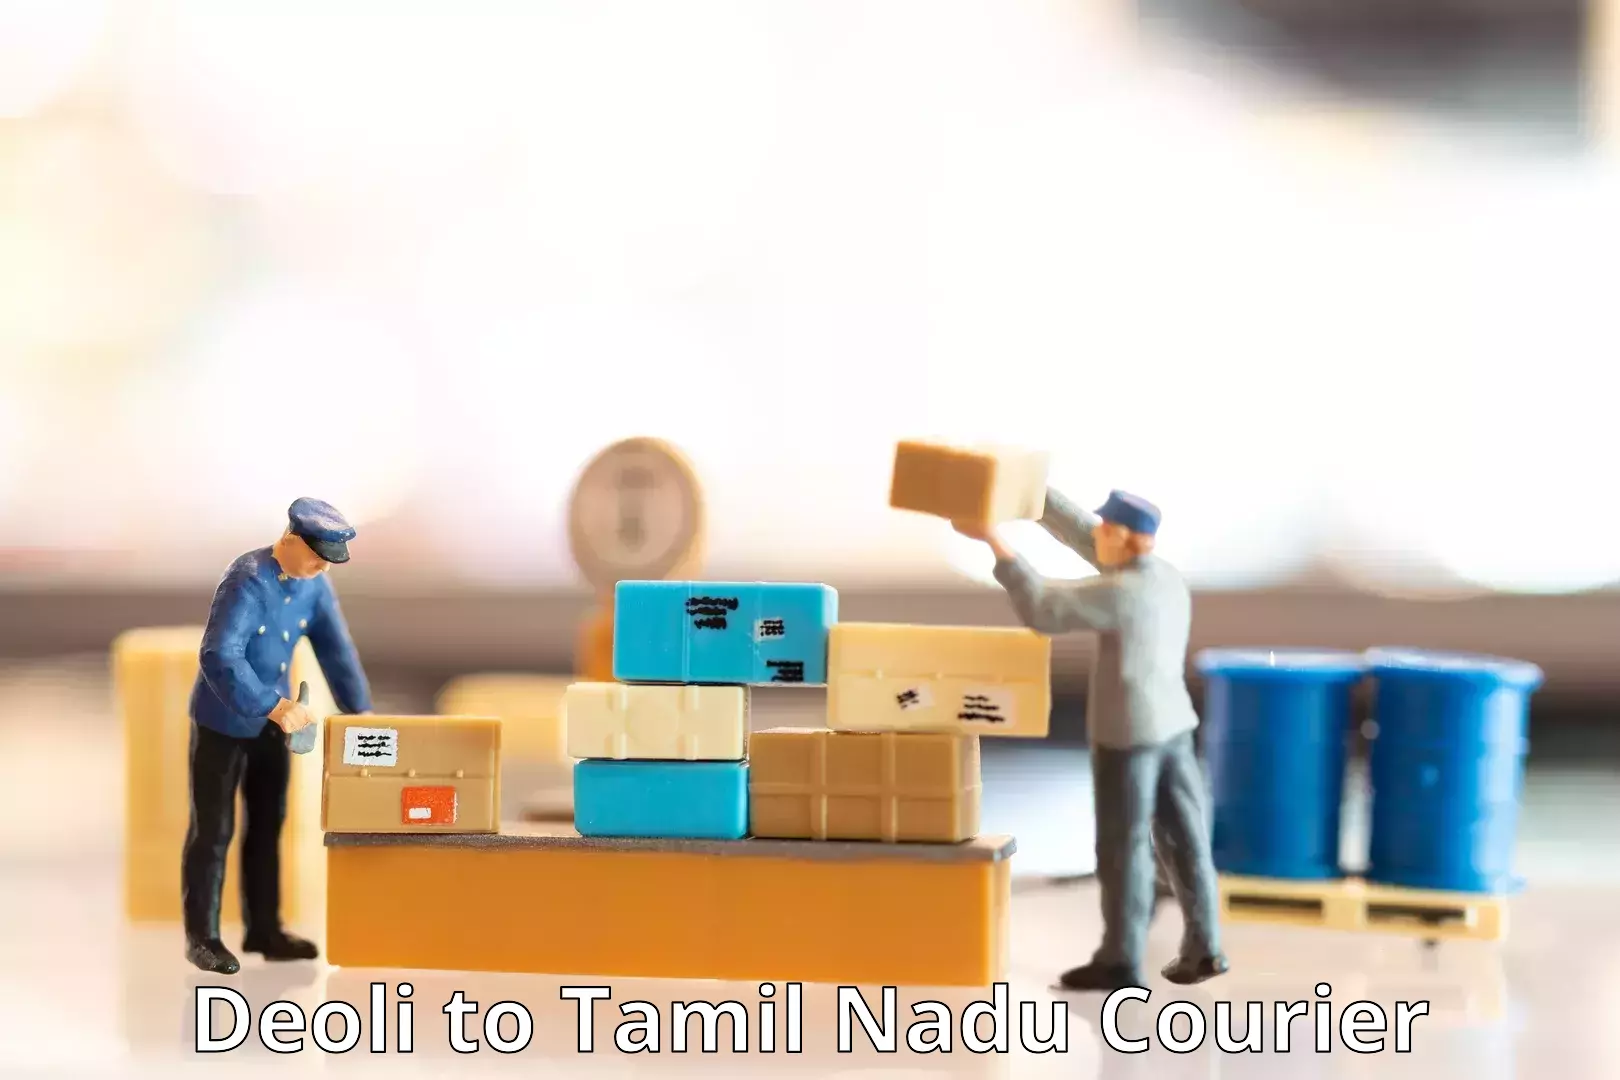 Courier service innovation in Deoli to Tamil Nadu